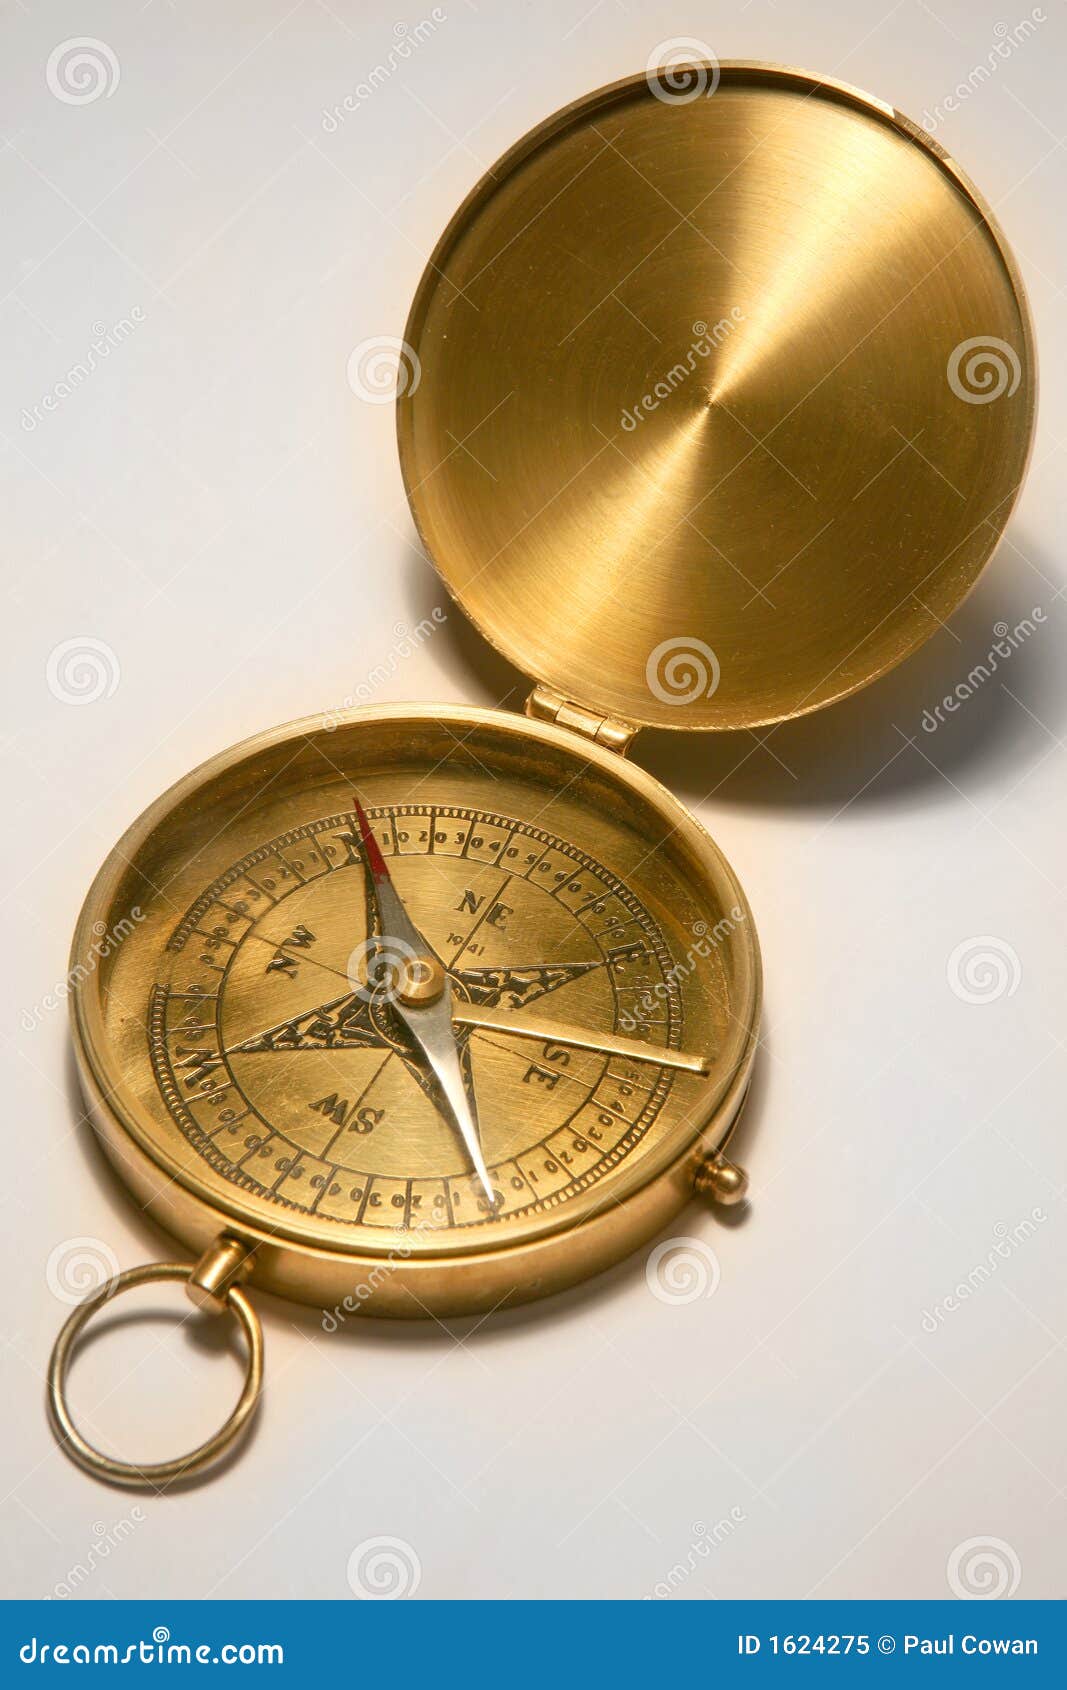 American Boy Scout Compass Antique Vintage Brass Compass THORINSTRUMENTS with Device 